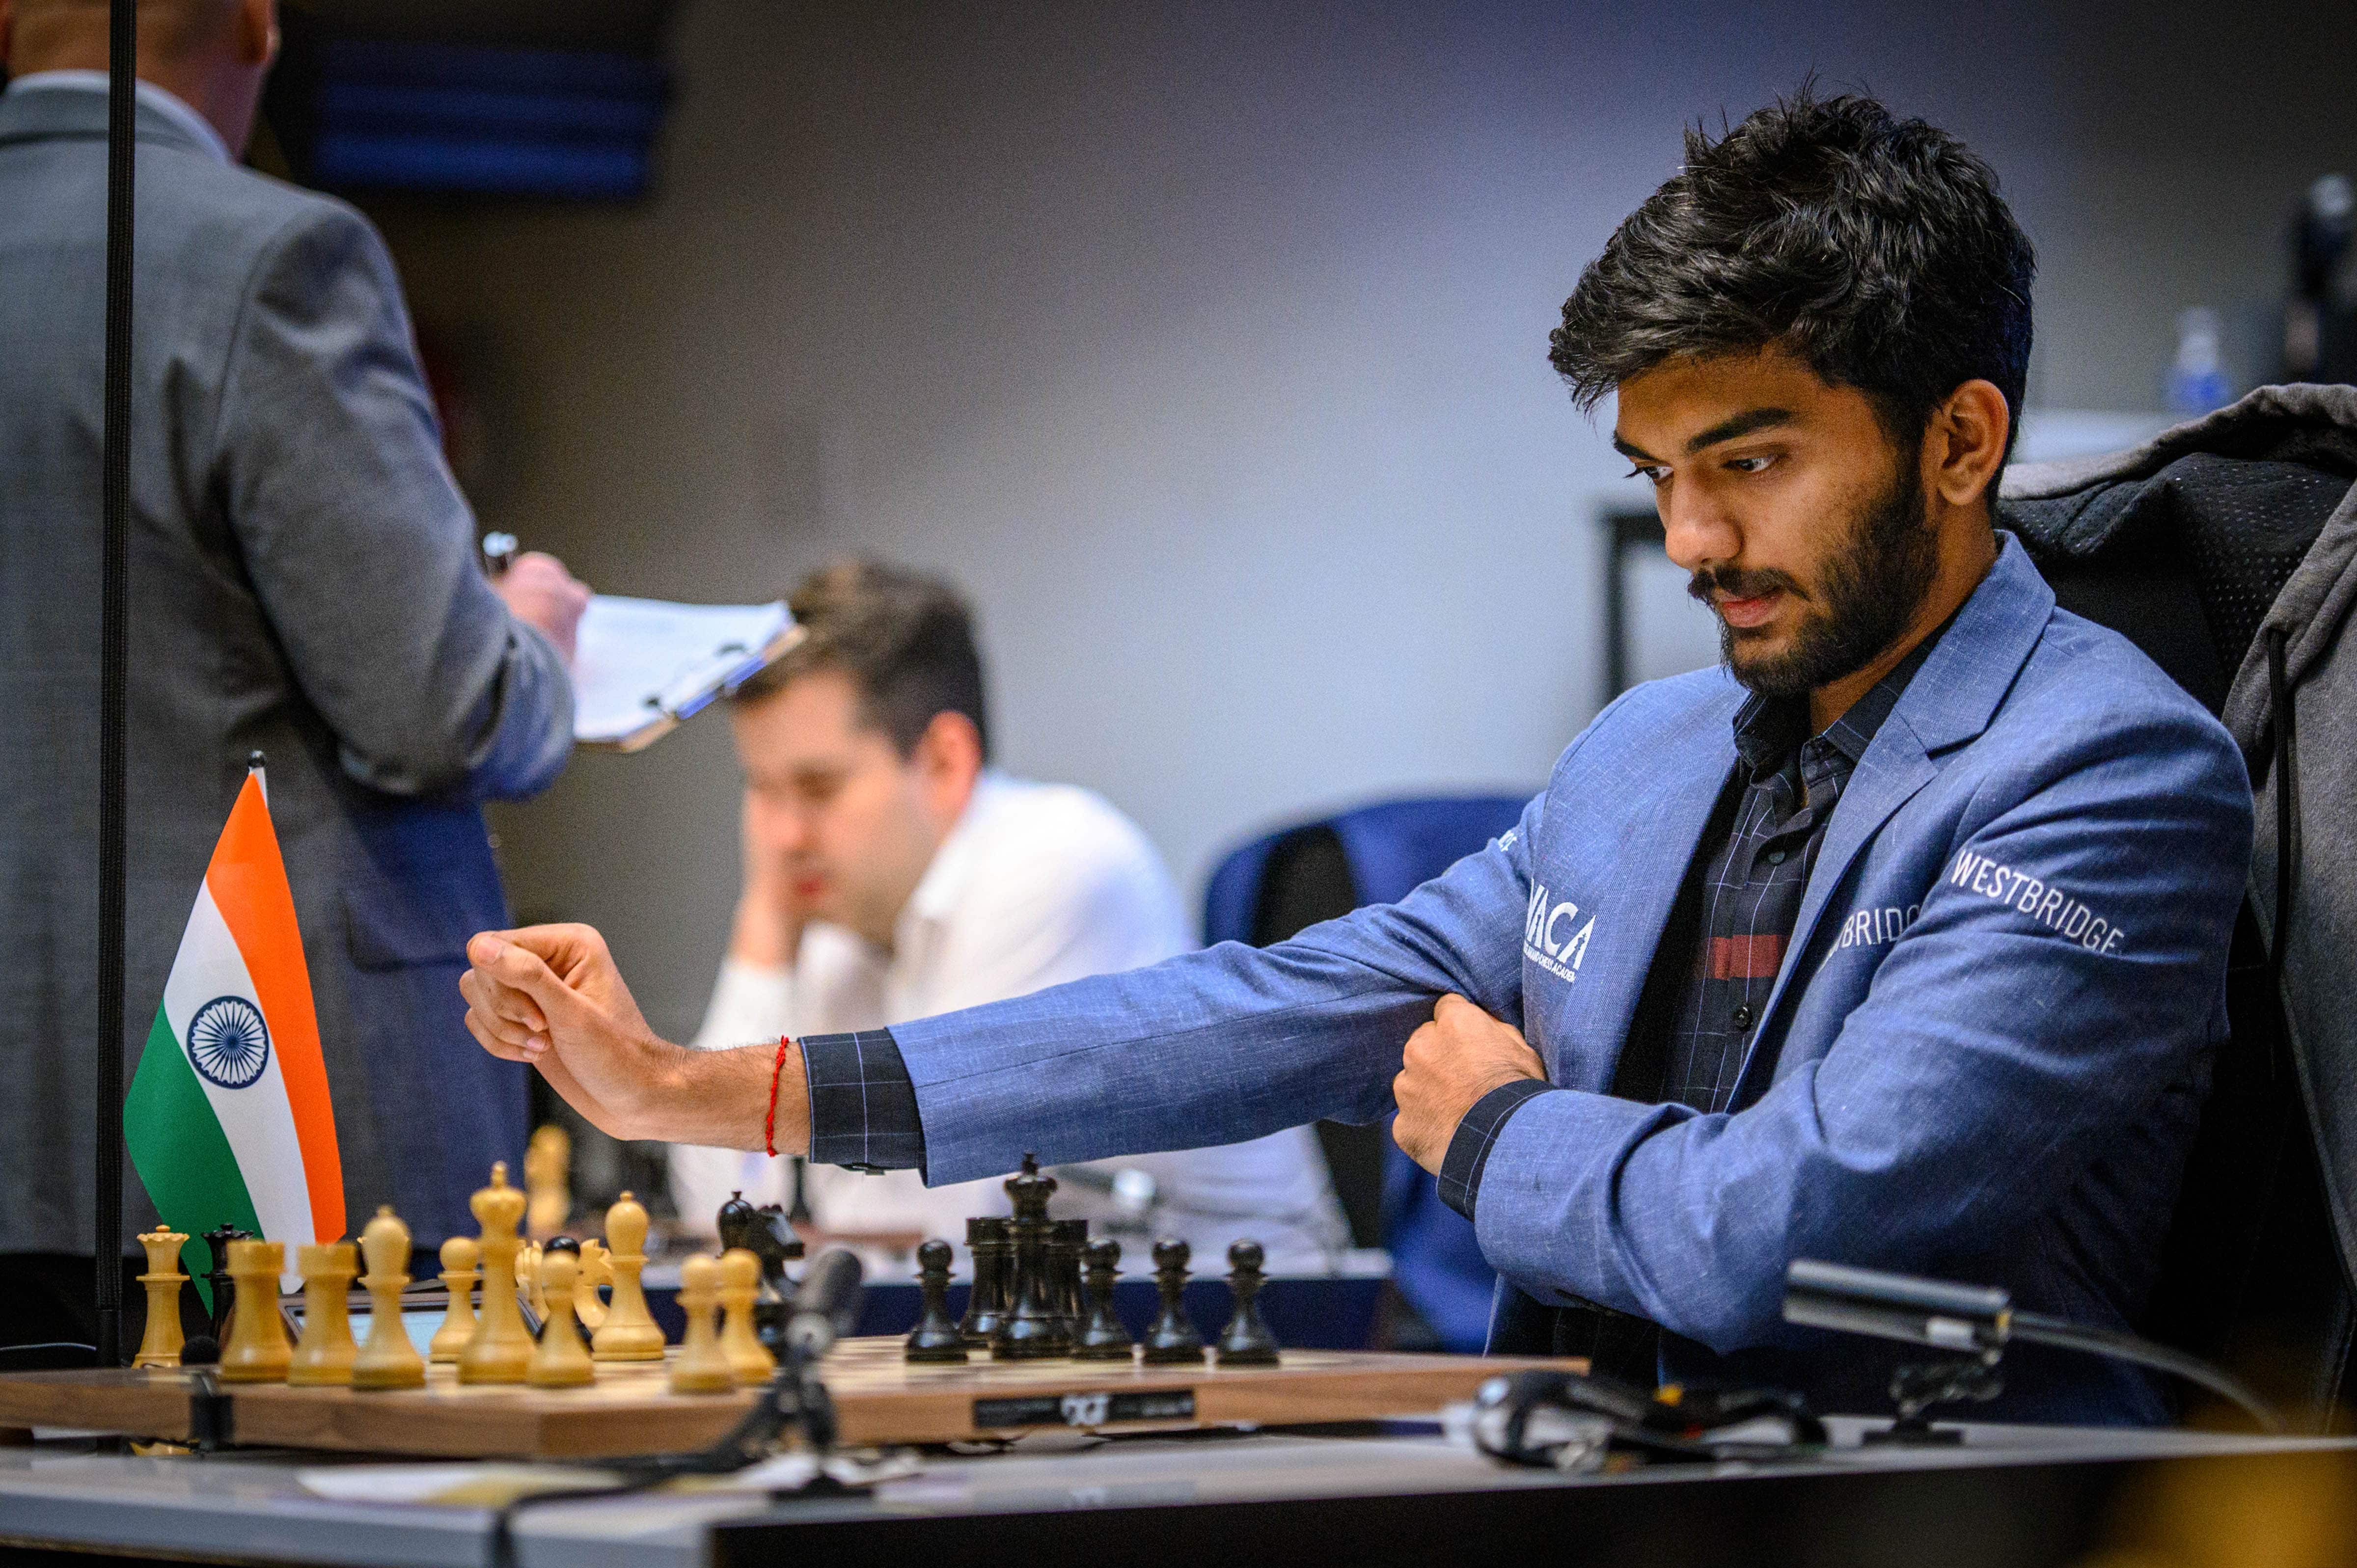 Who is he up against in World Chess Championship final?